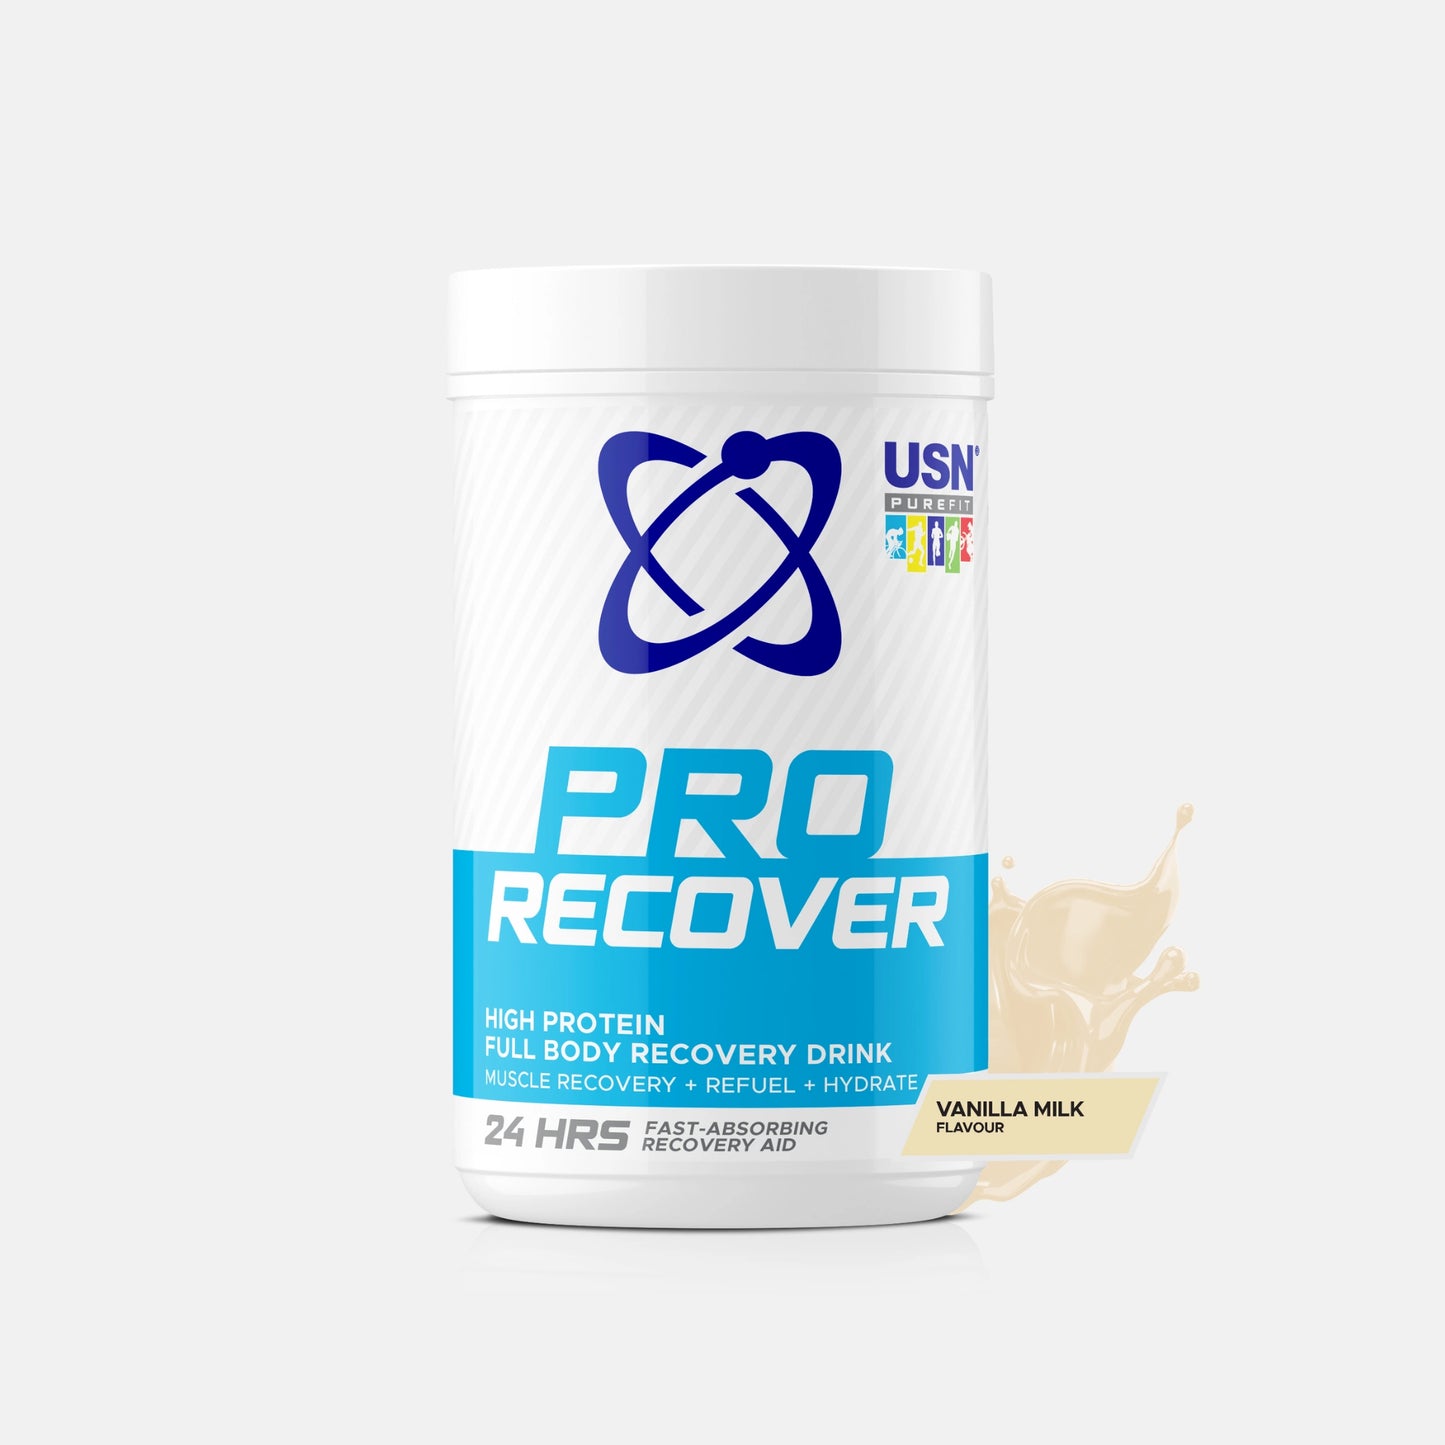 Pro Recover